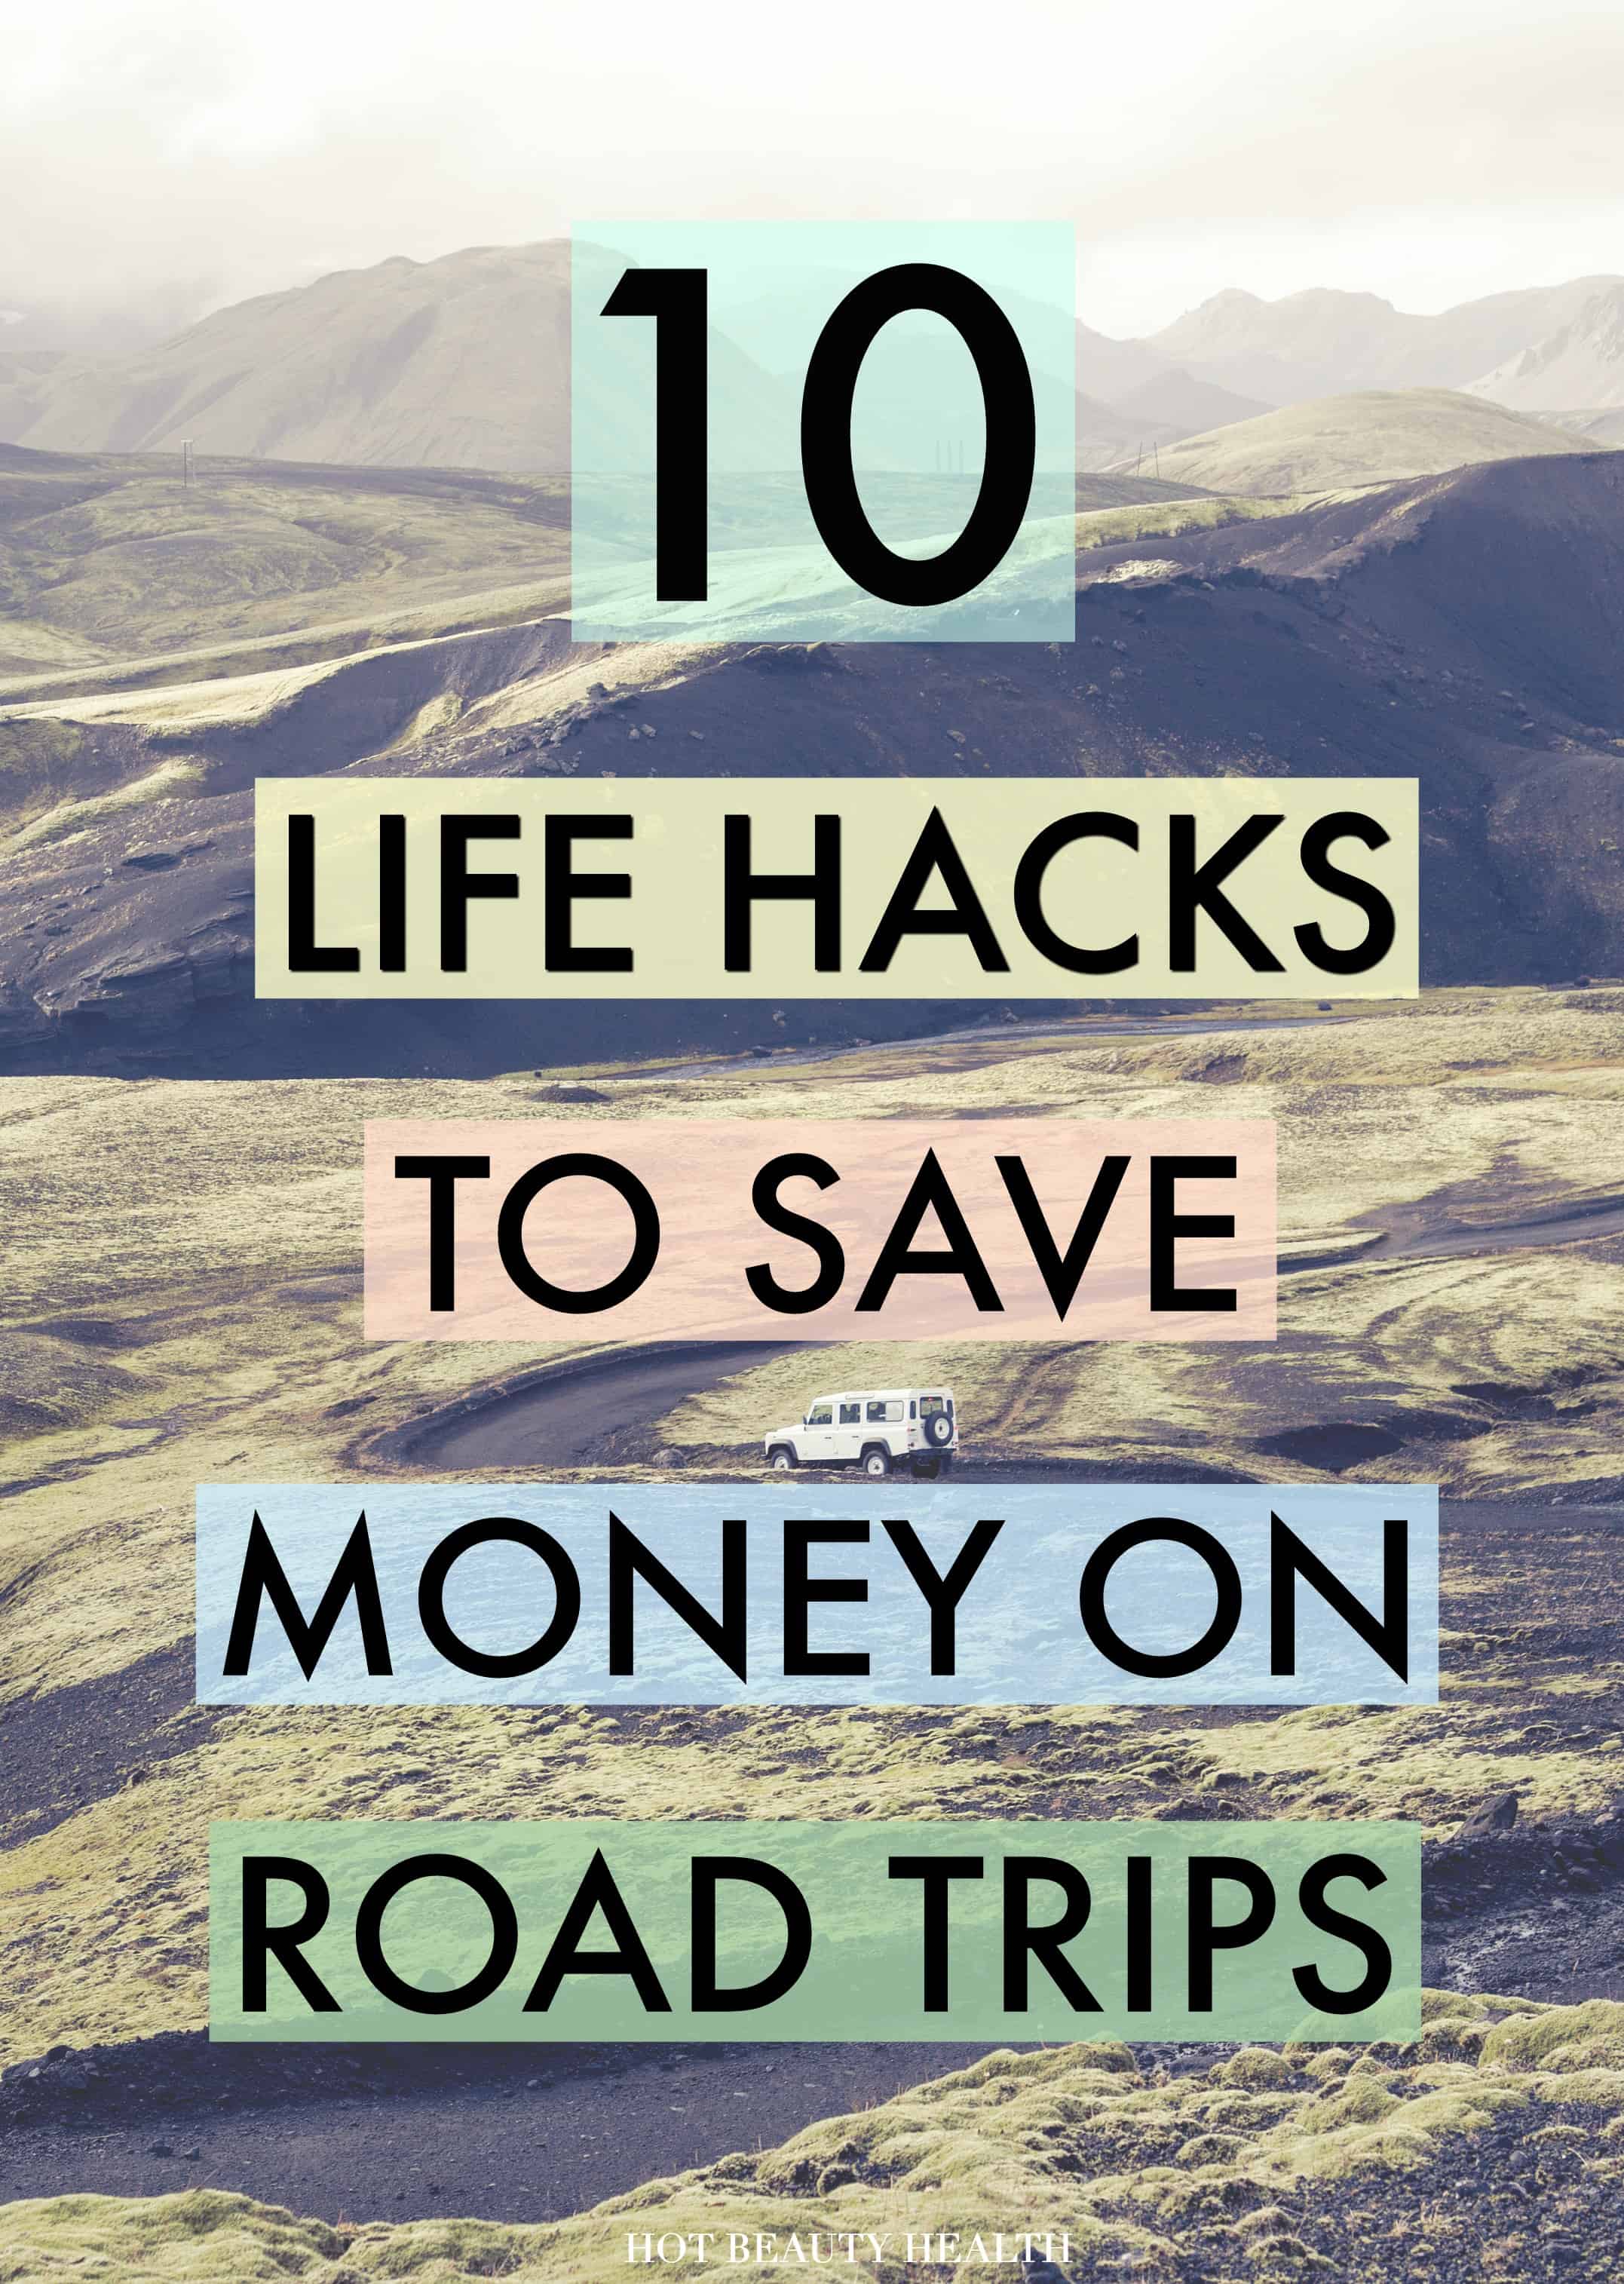 10 Life Hacks To Save Money On Road Trips